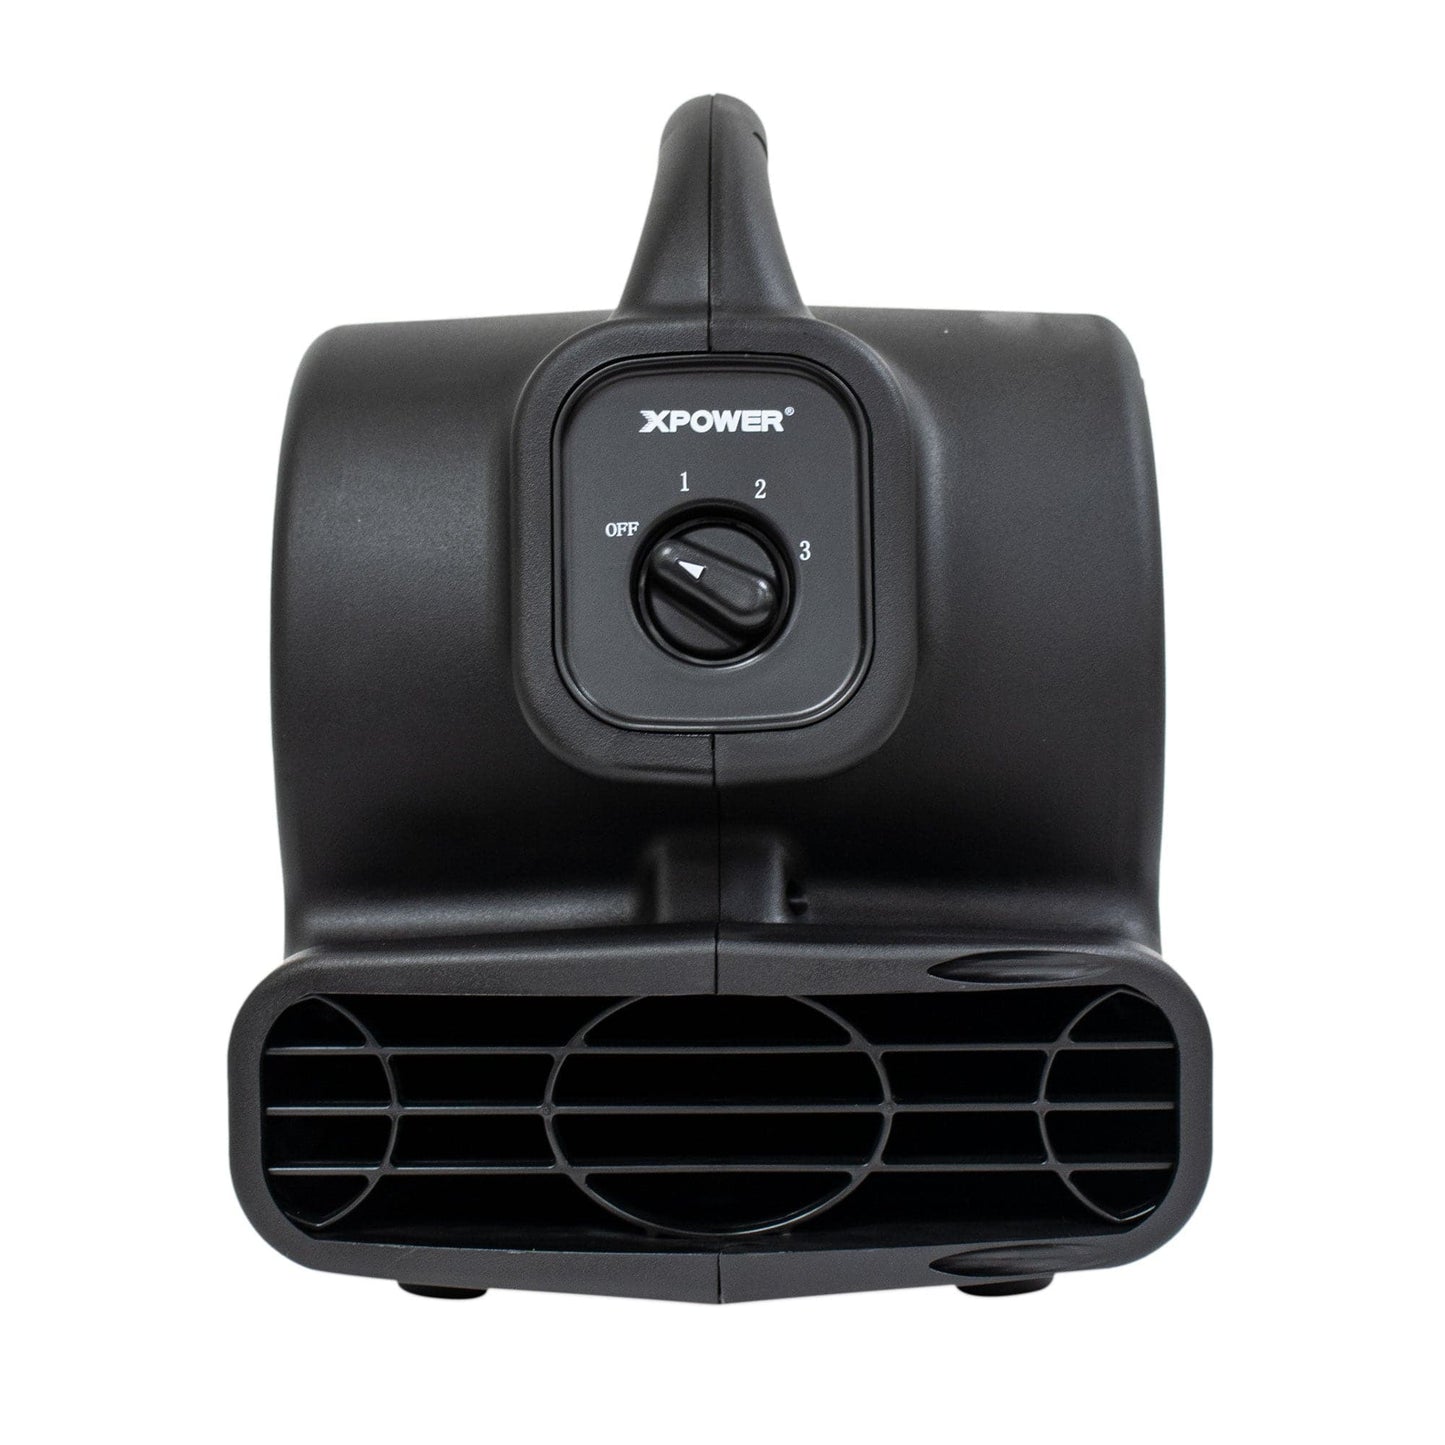 XPOWER P-80A 600 CFM Multi-Purpose Mini Mighty Air Mover, Utility Fan, Dryer, Blower with Built-in Power Outlets